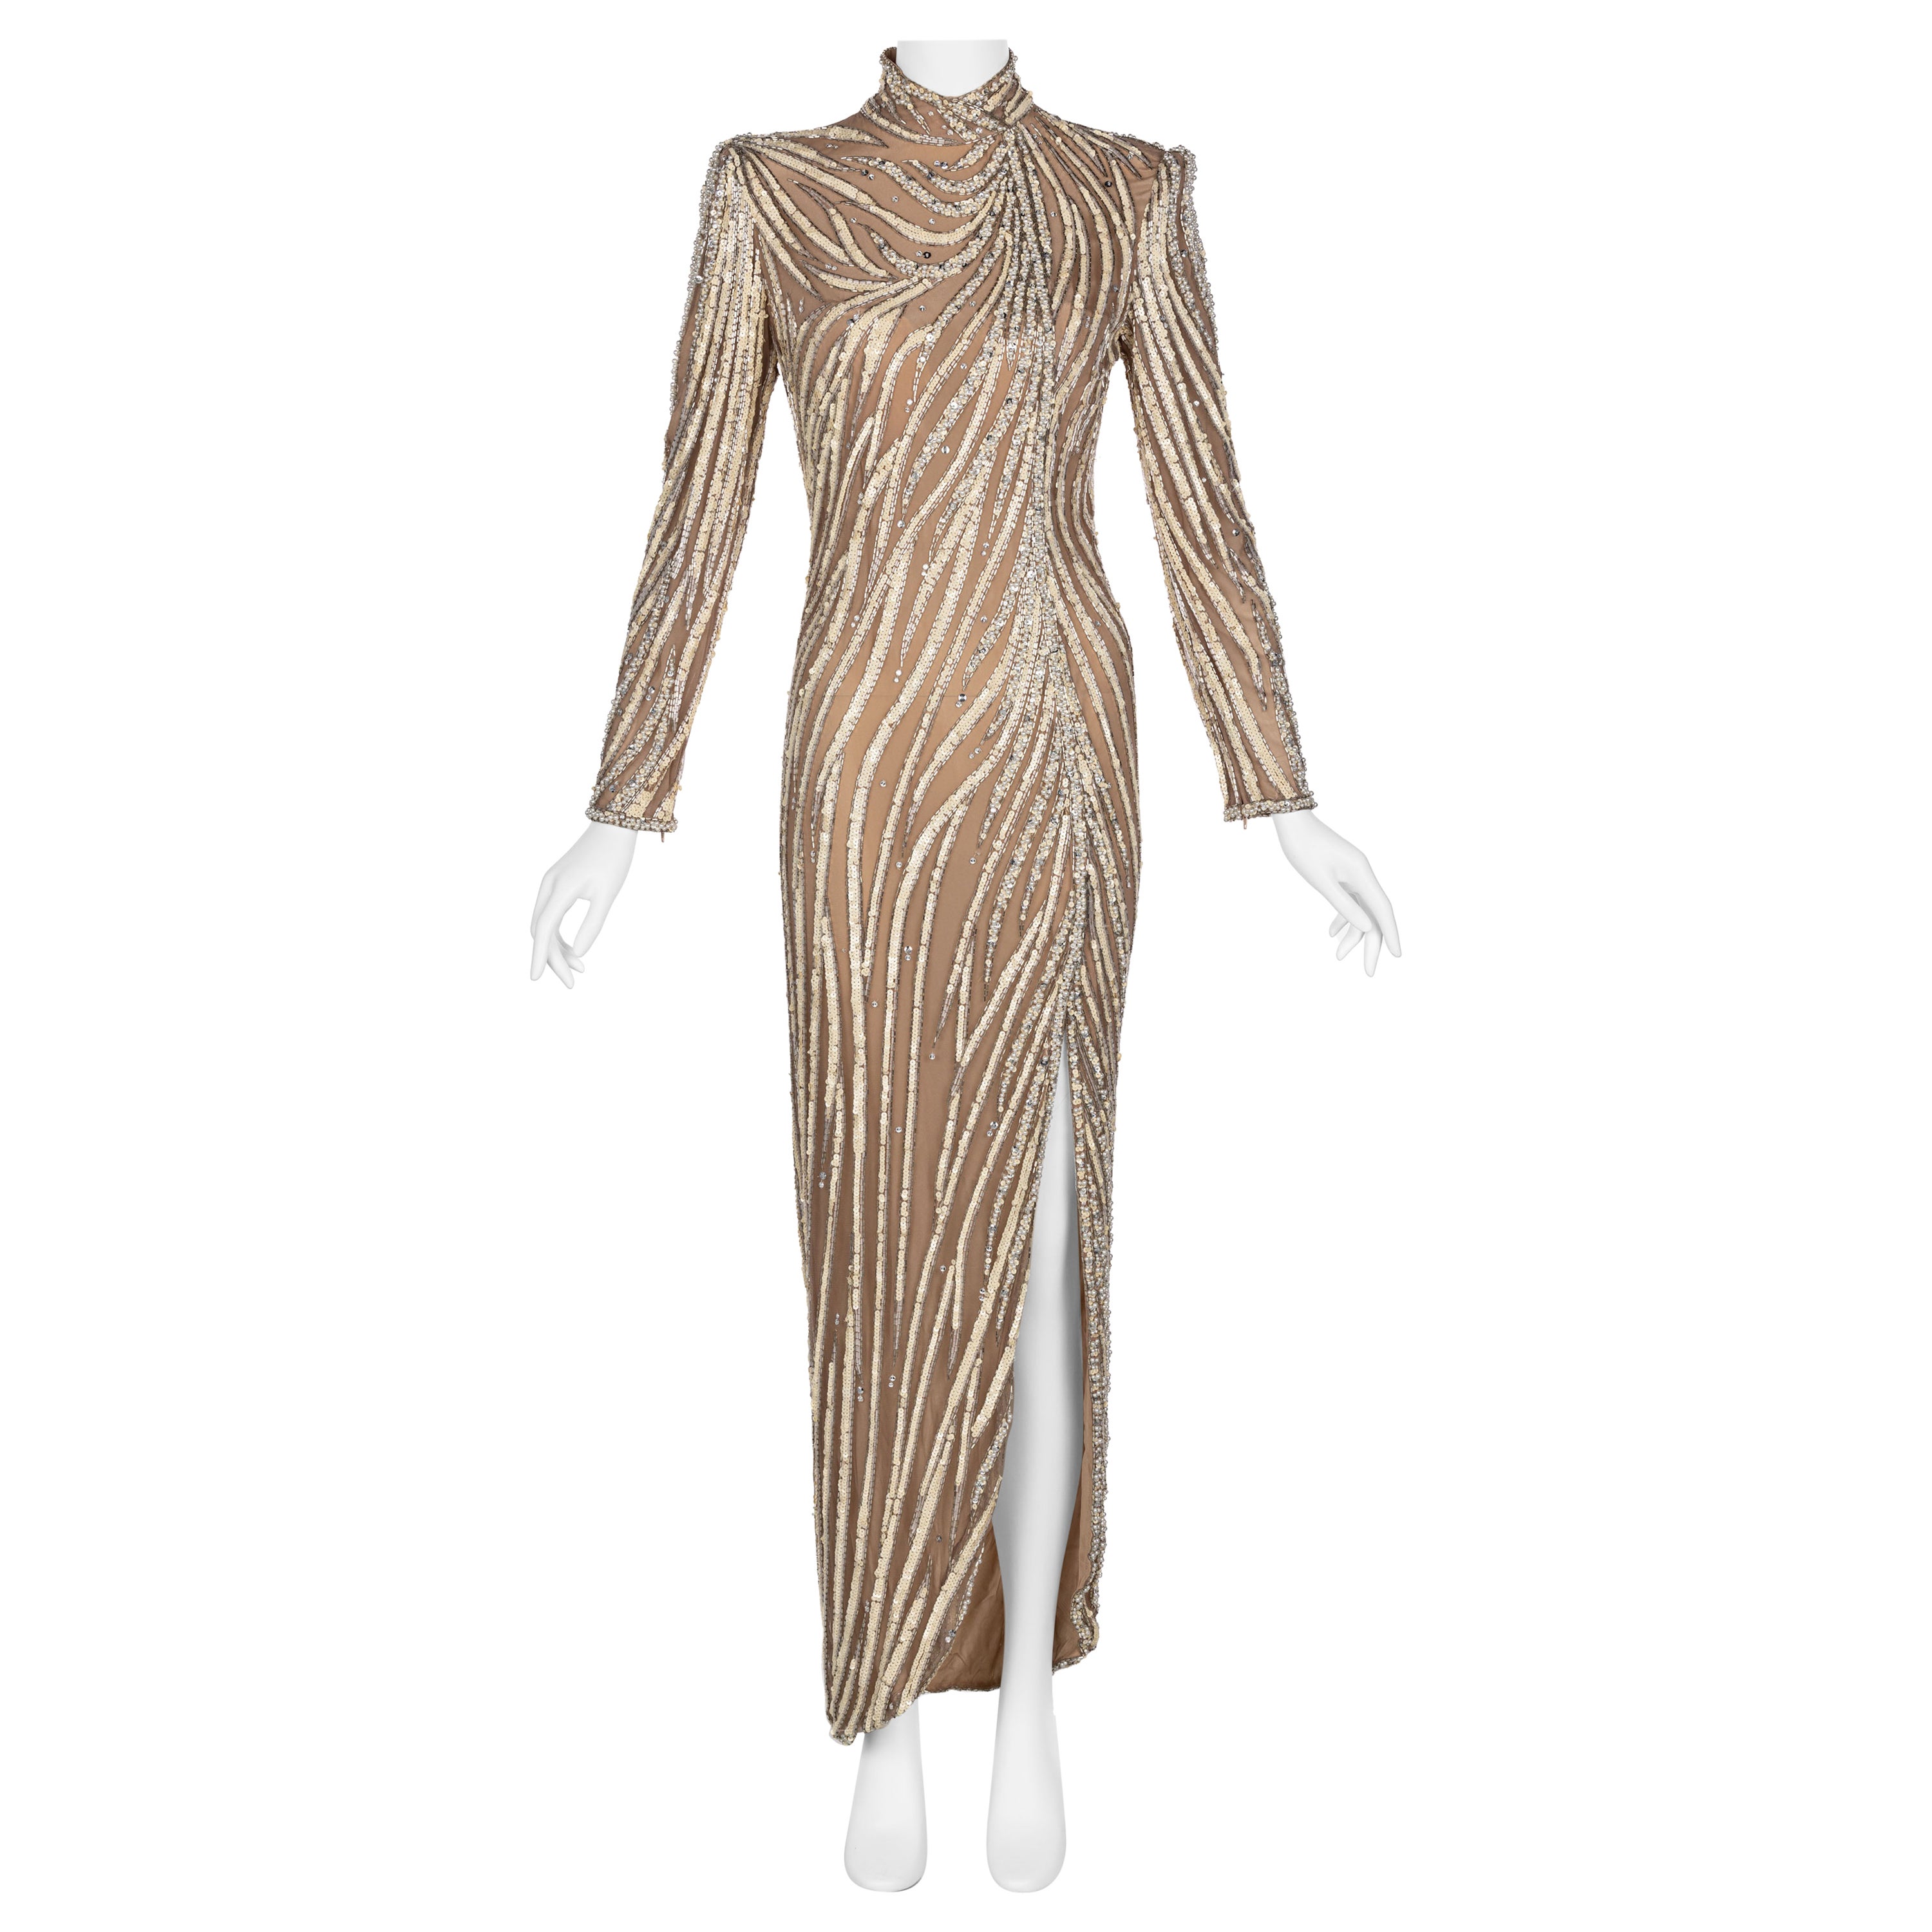 Bob Mackie Ivory Sequin, Pearls & Nude Stretch Net Thigh High Slit Dress, 1980s For Sale